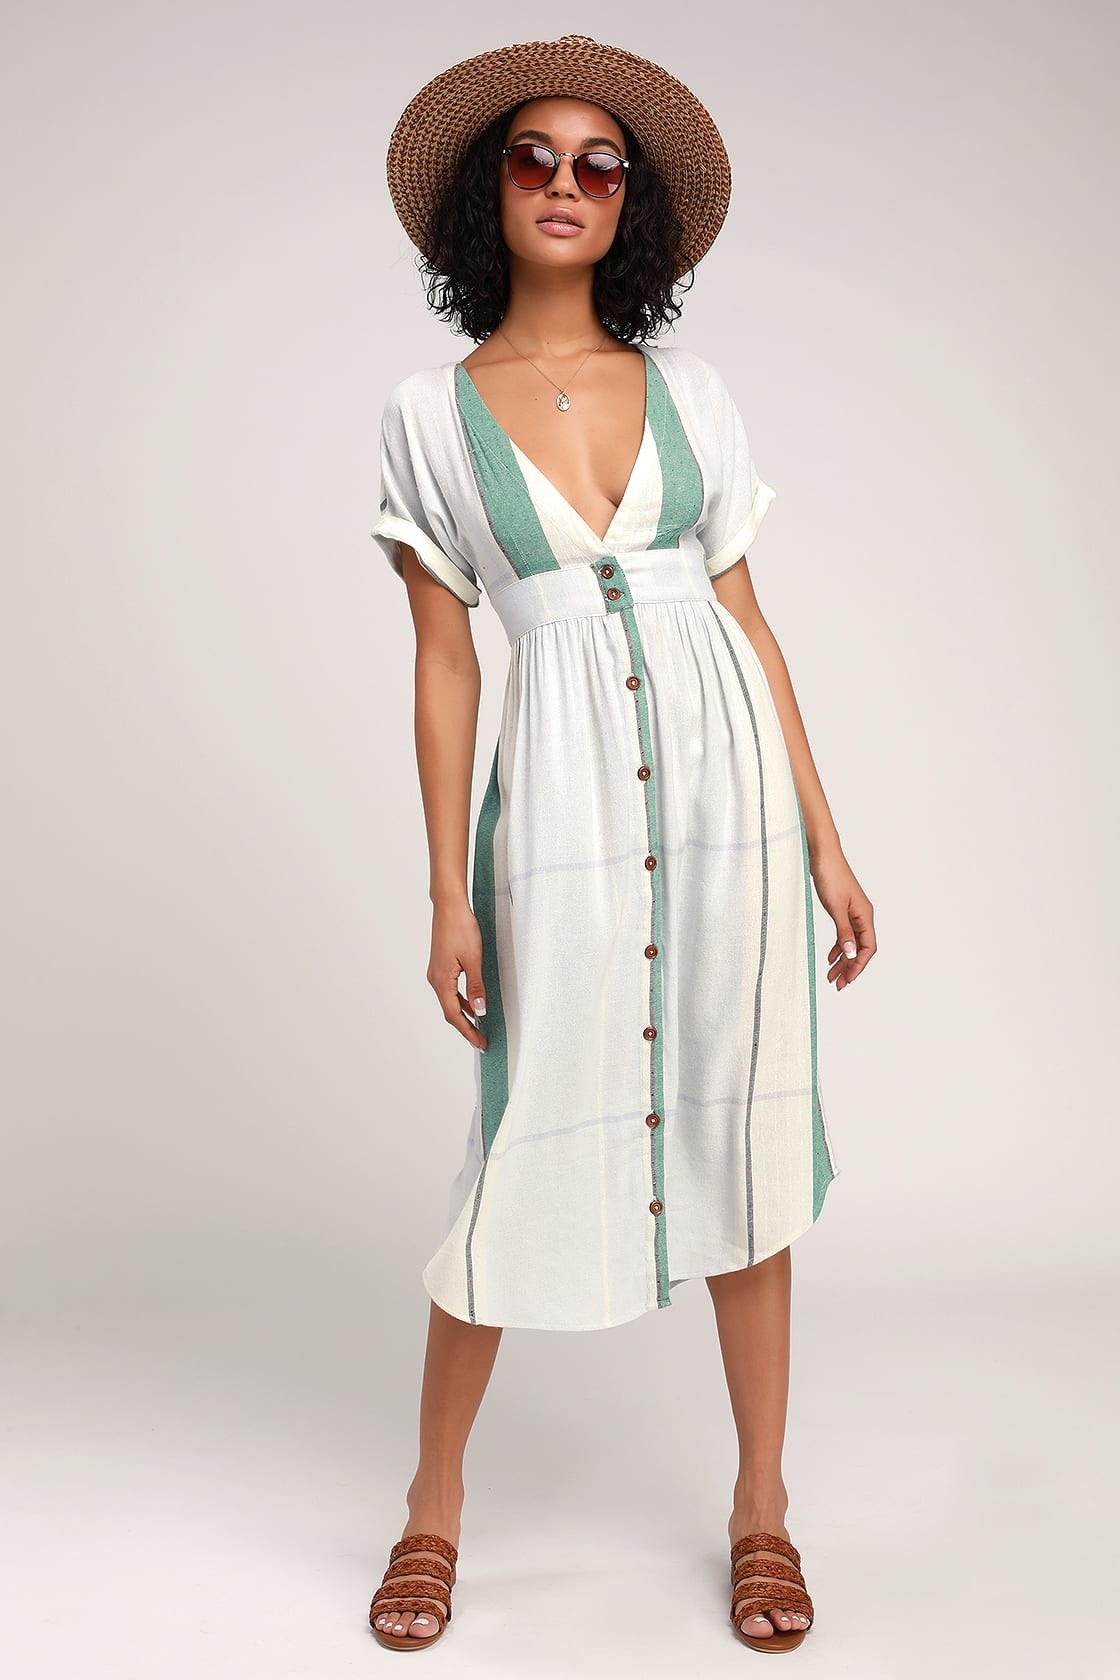 Model is wearing a white and green striped button-up midi dress with brown sandals